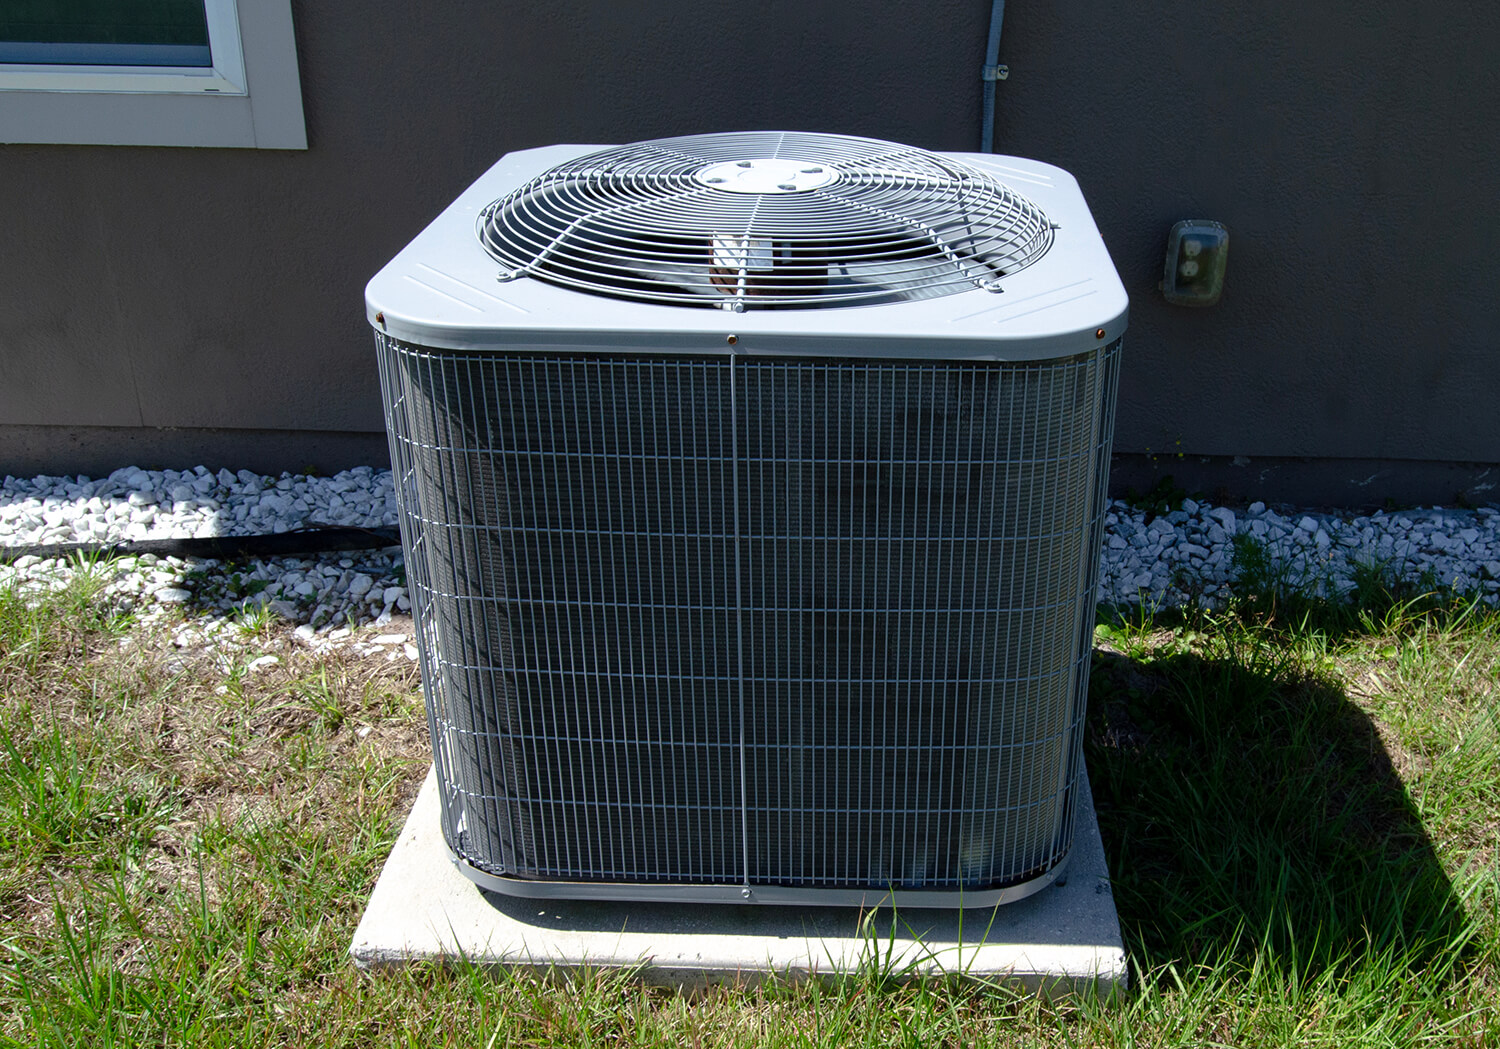 Buying a Ductless Mini Split cooling system Unit for my Place This Week